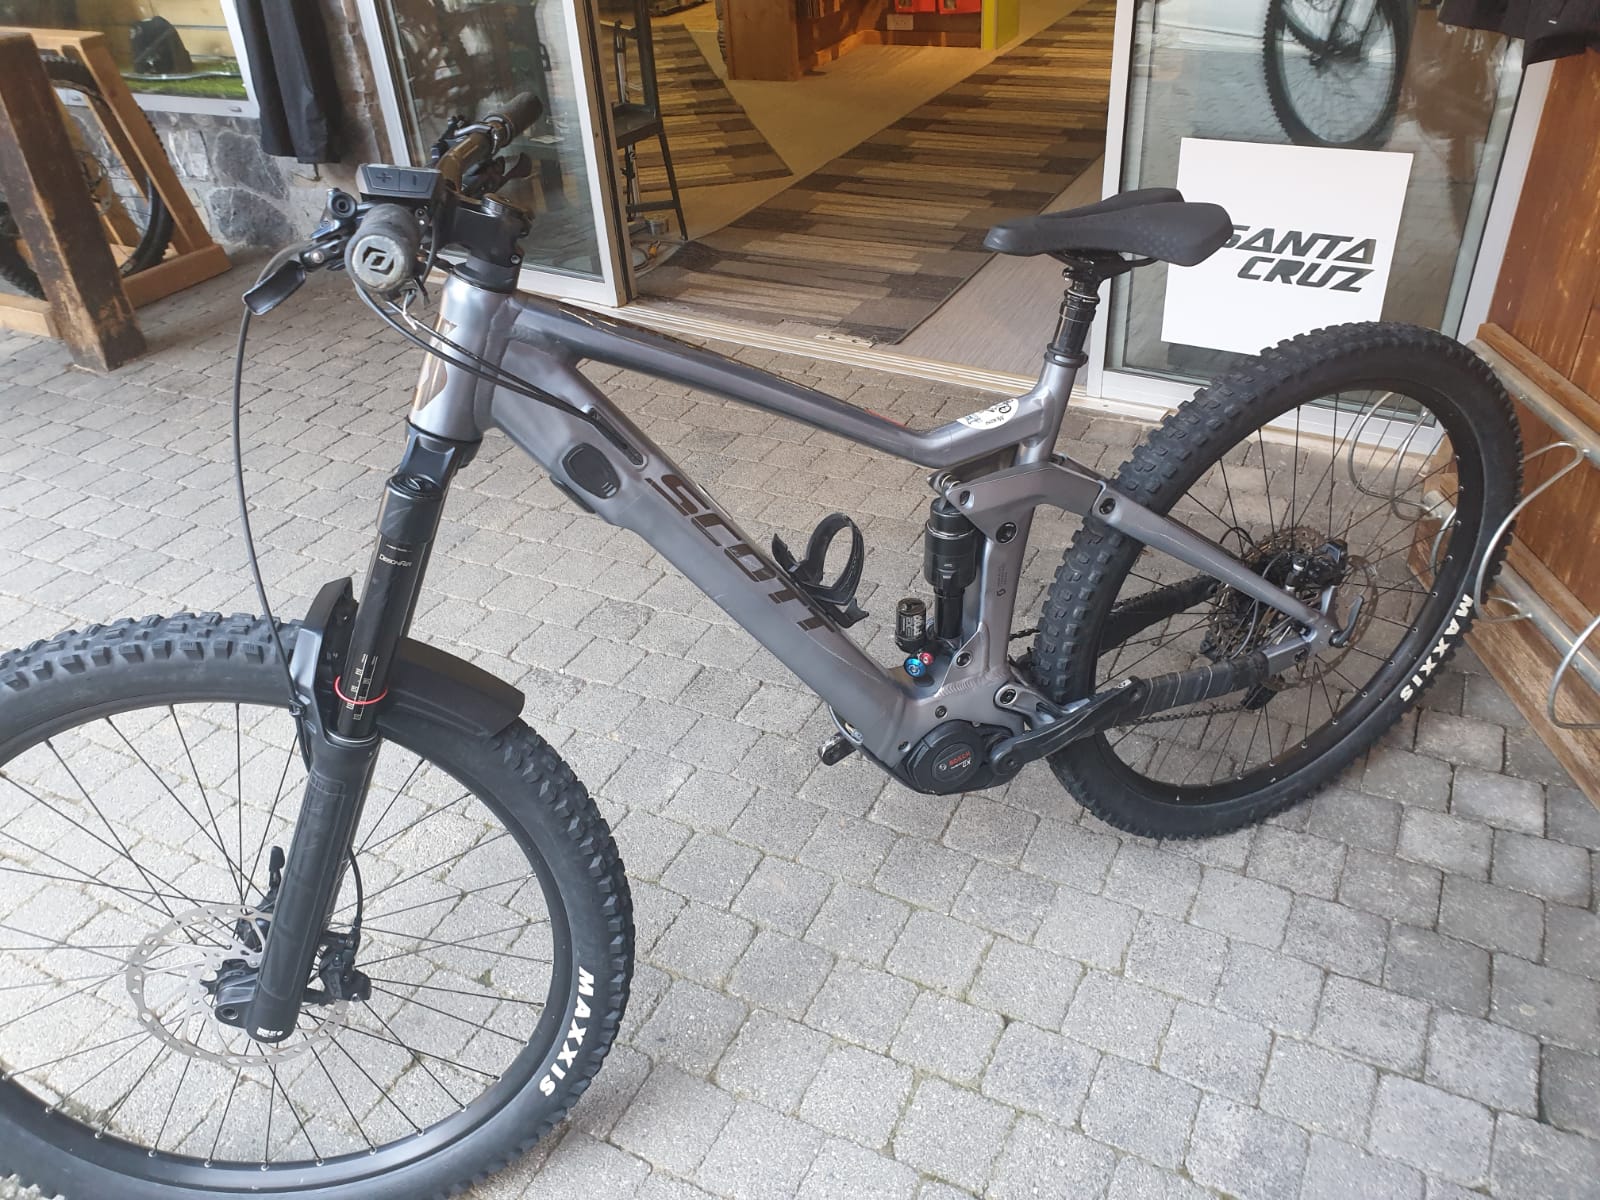 WhatsApp Image 2022-09-10 at 17.16.01 Used Bikes for Sale: SCOTT e-Ransom 920 used: 4800€